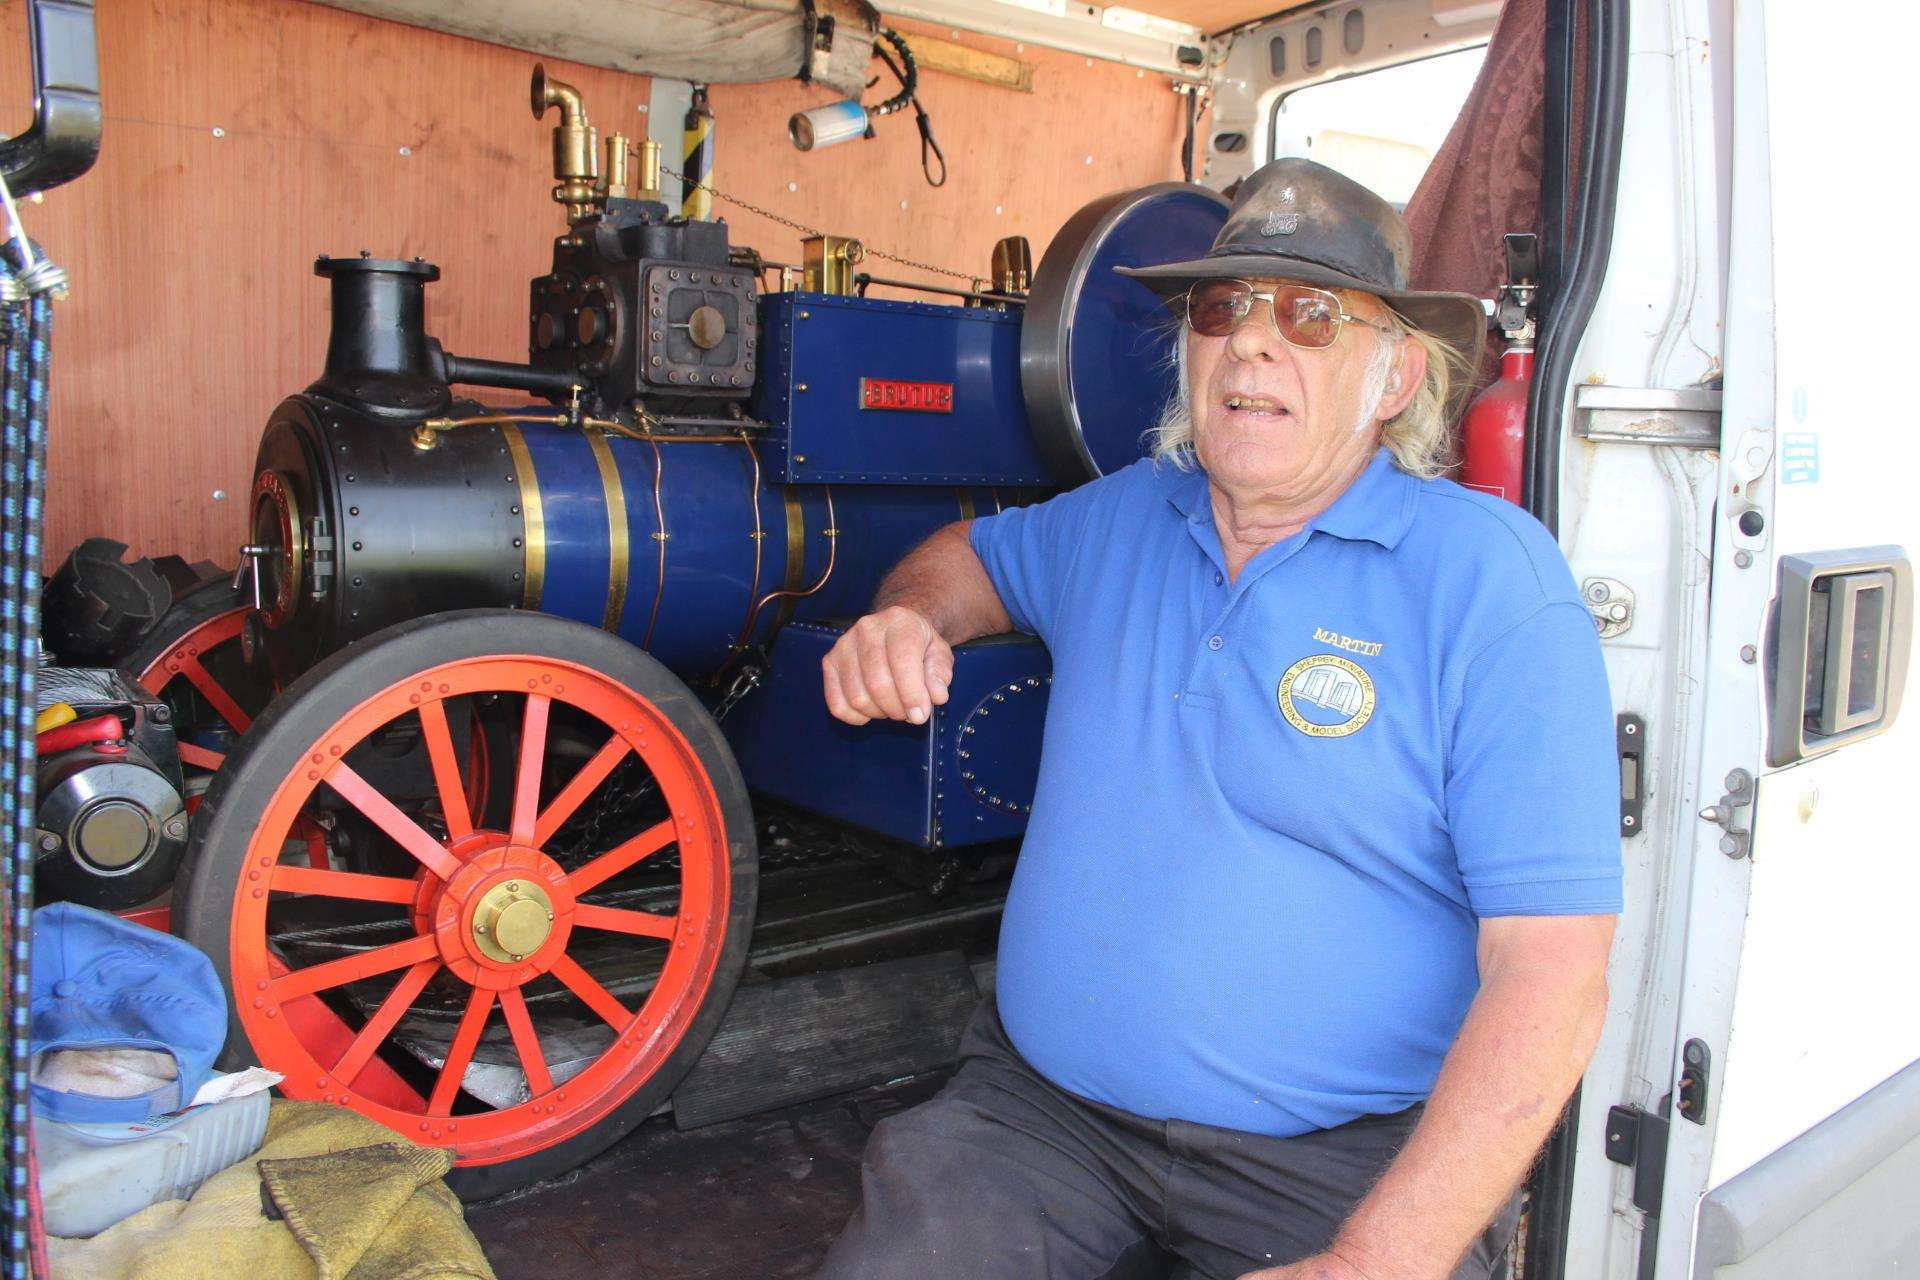 Martin Nealey with his Brutus traction engine at the Sheppey Miniature Model Engineering Society site at Barton's Point, Sheerness (2713875)